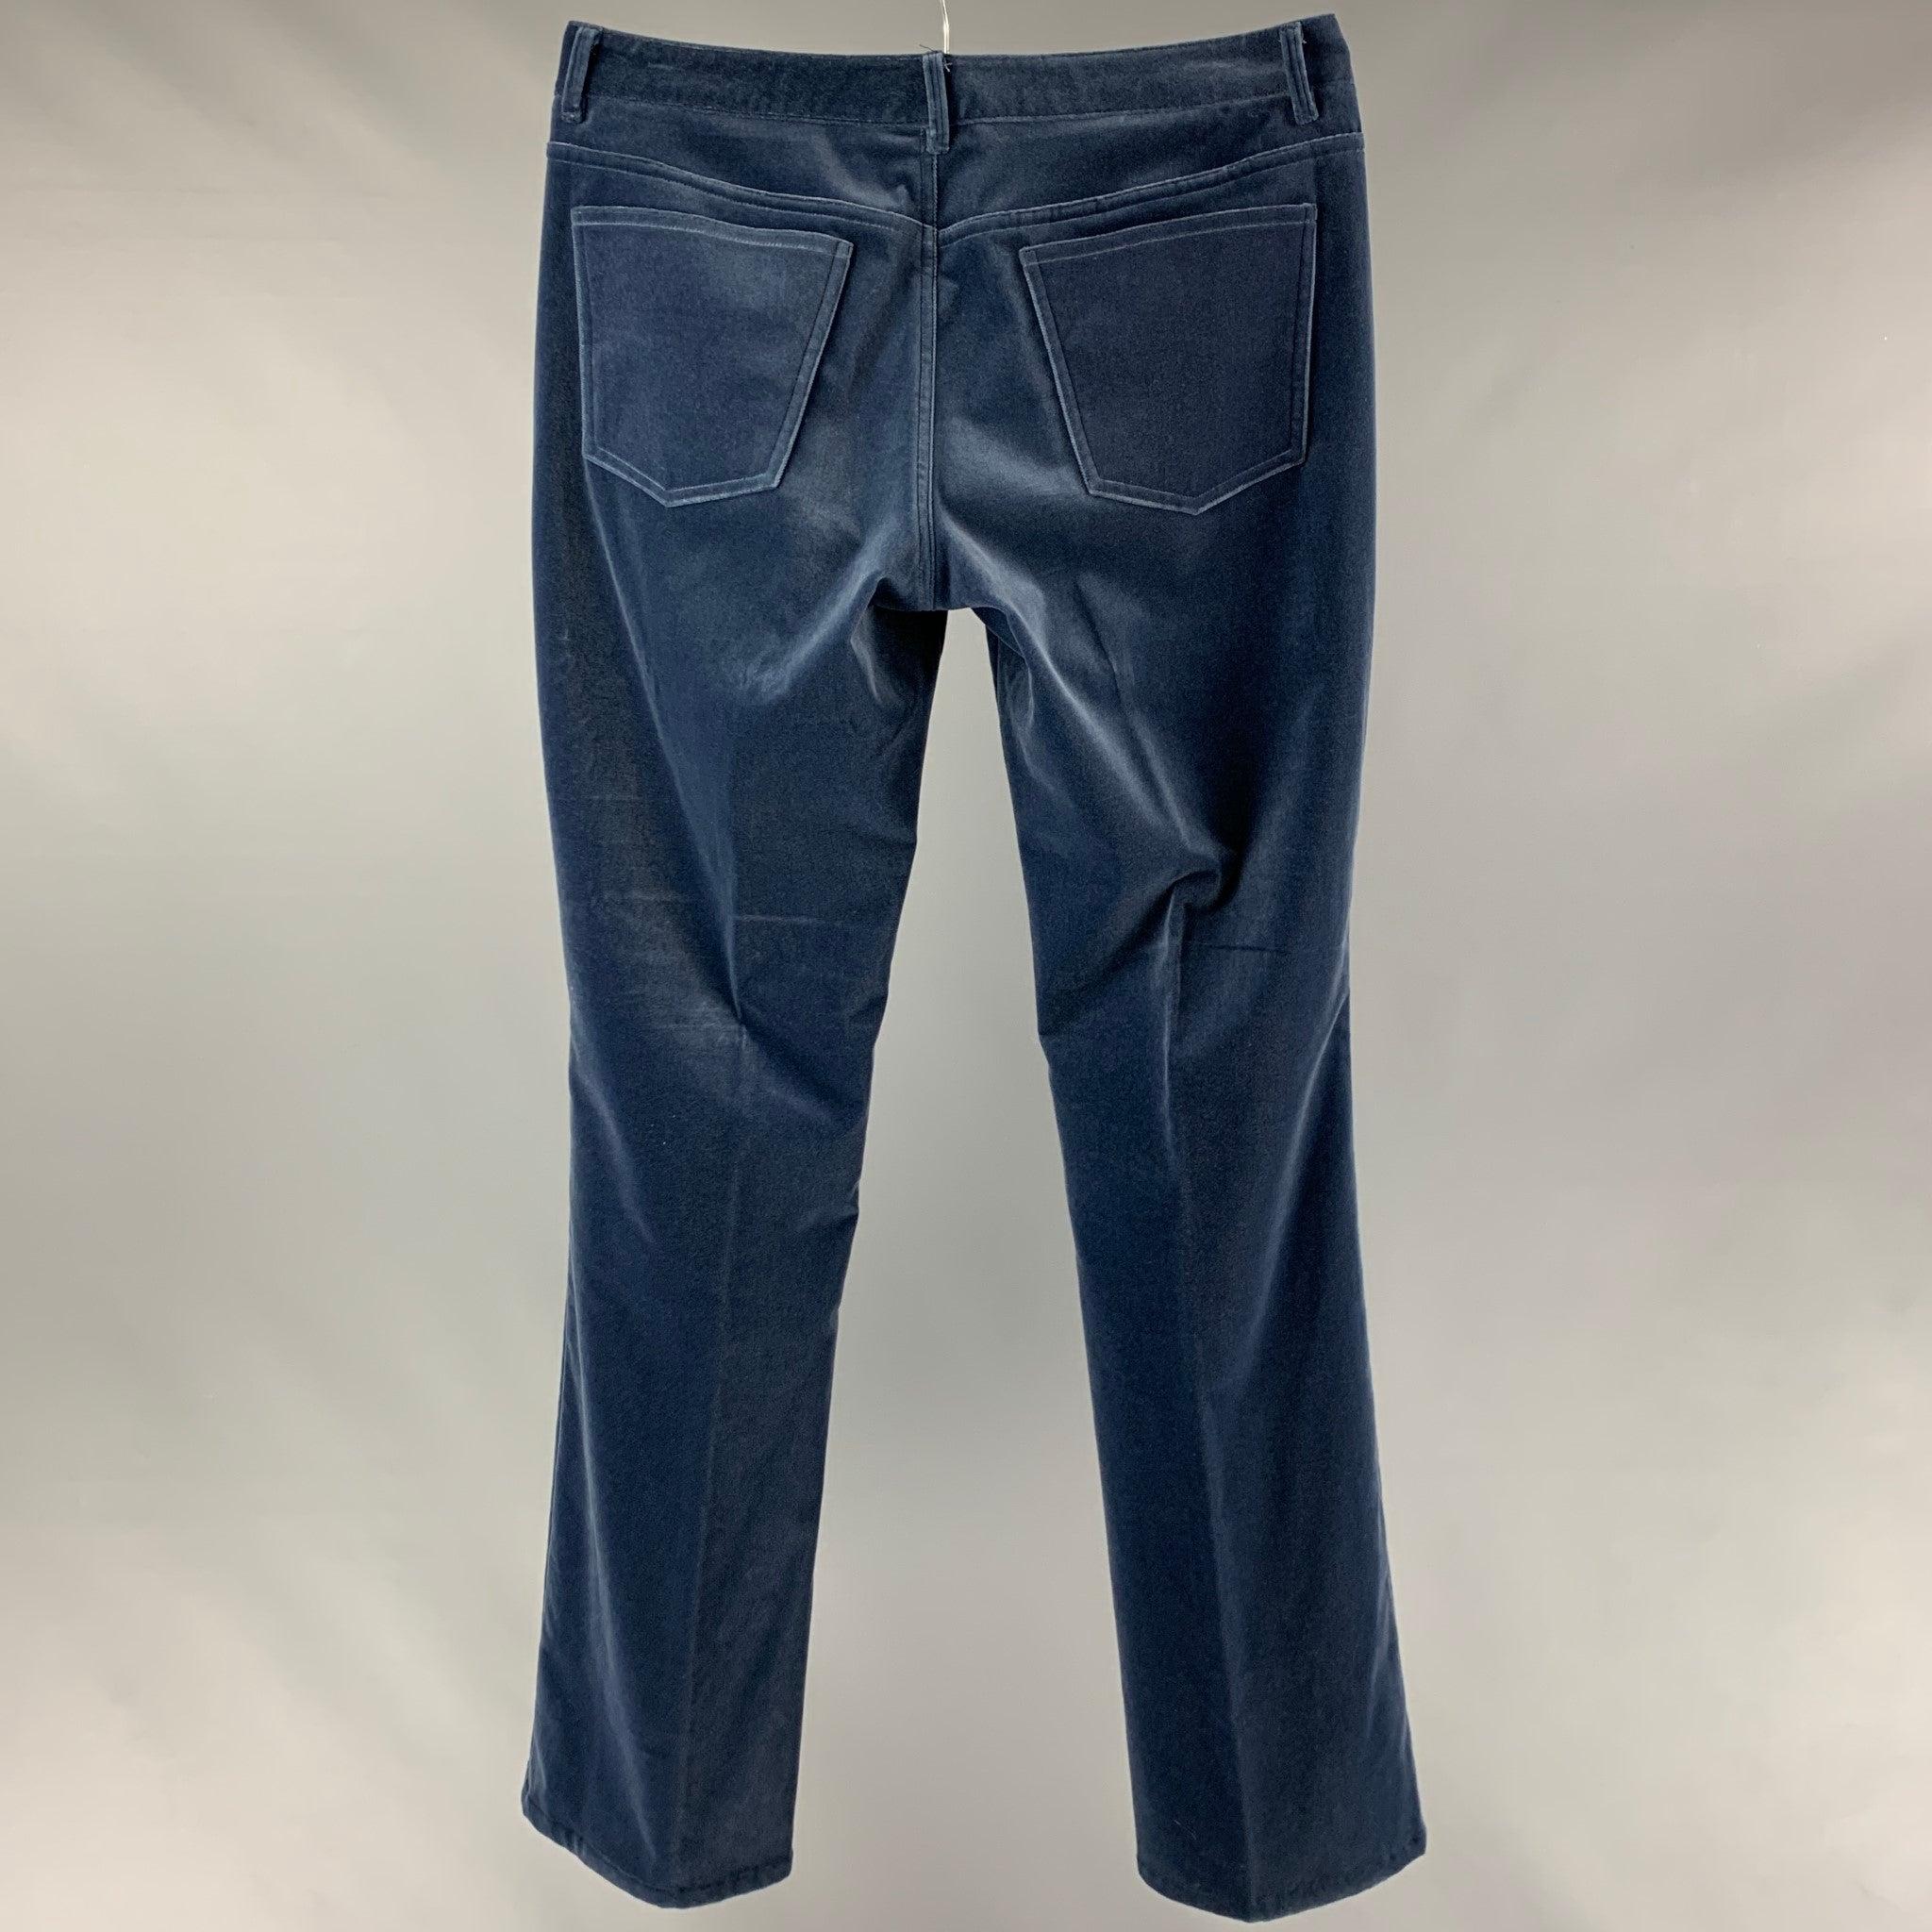 RALPH LAUREN BLACK LABEL dress pants comes in blue cotton and elastane velvet fabric, five pockets , a straight legs, zip up fly closure.Very Good Pre-Owned Condition. Minor Mark at Front. 

Marked:   10 

Measurements: 
  Waist: 34 inches  Rise: